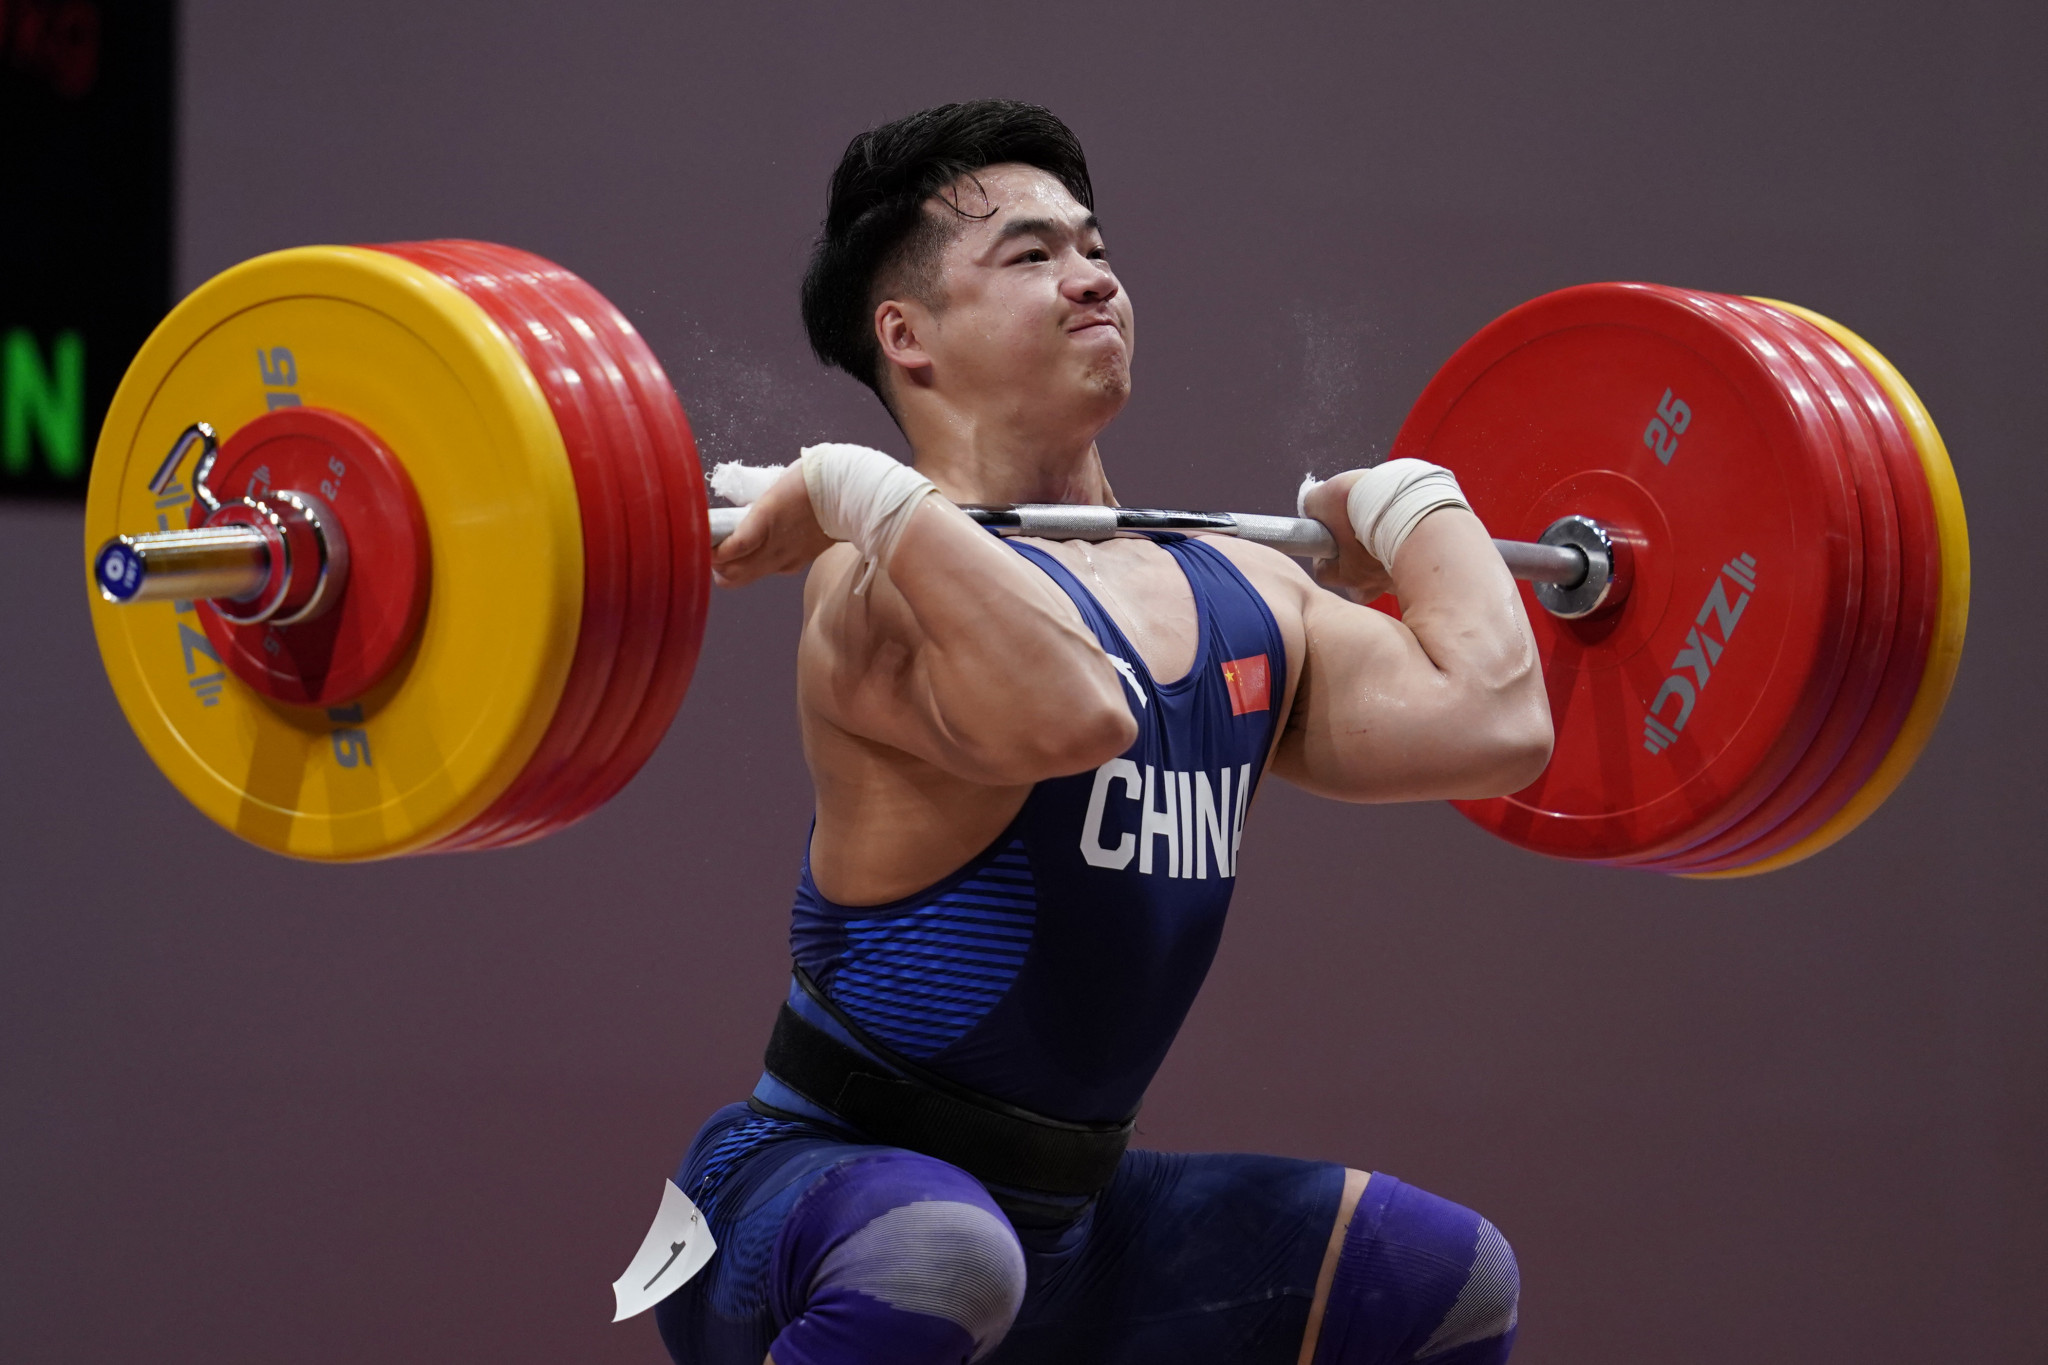 Tian Tao is expected to be a strong competitor for China ©Getty Images